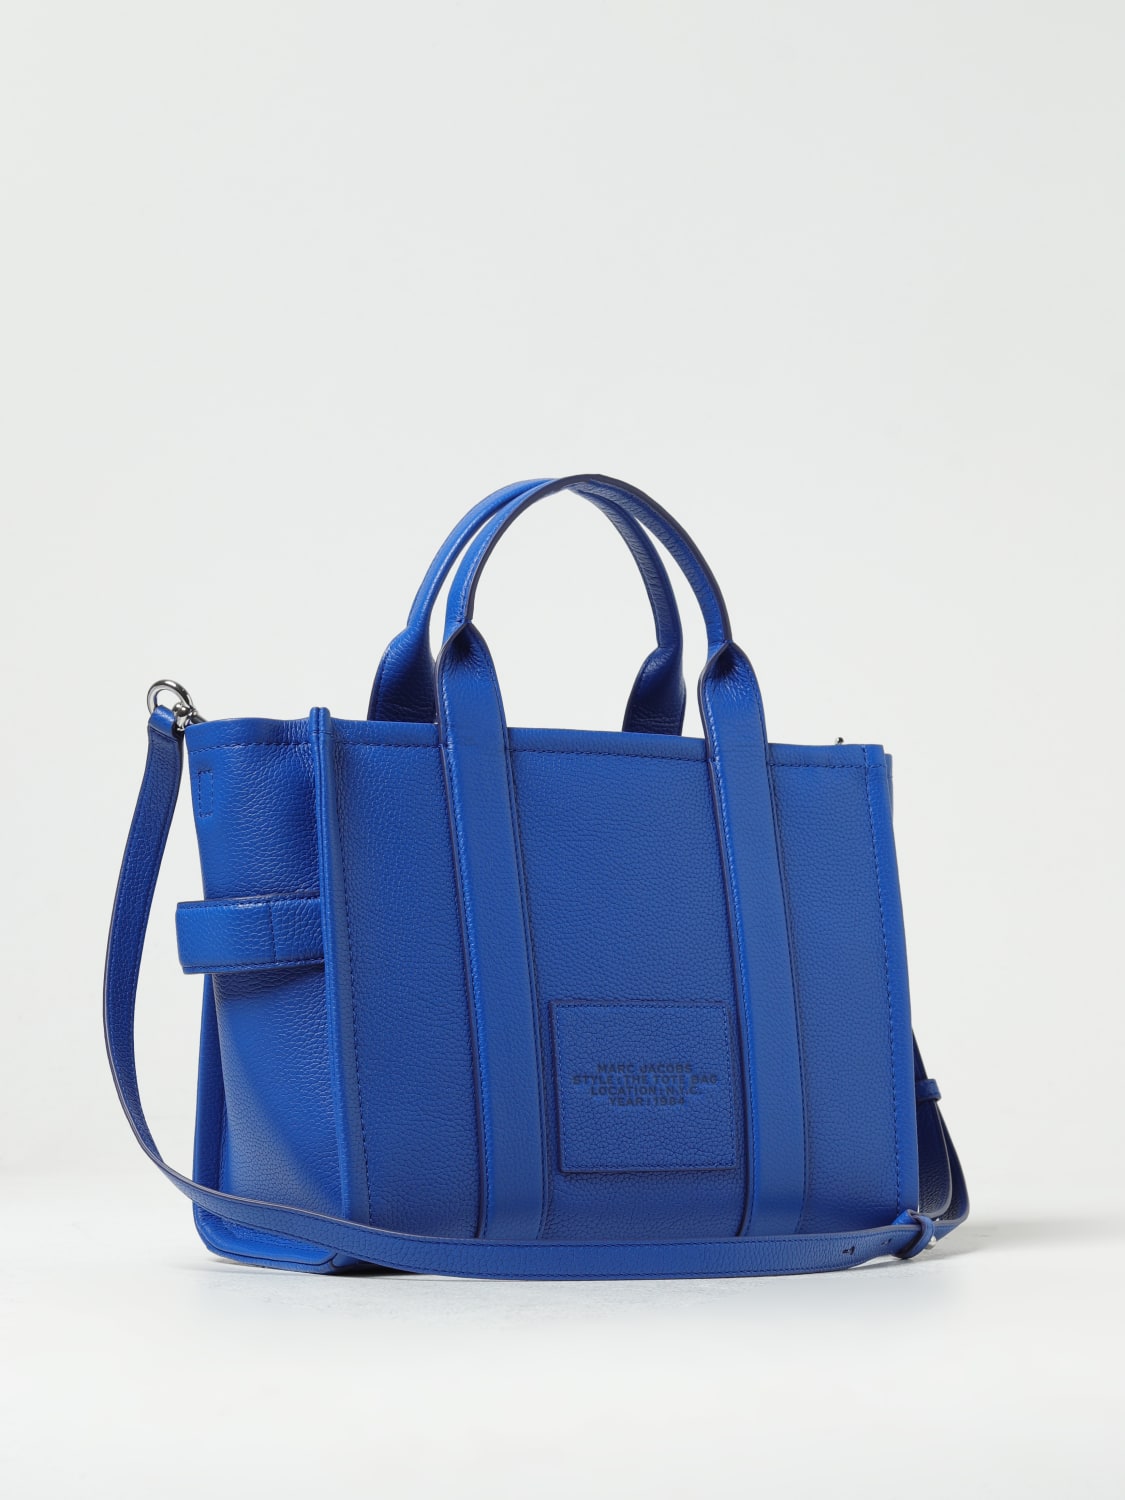 Marc Jacobs The Medium Tote Bag in Grained Leather